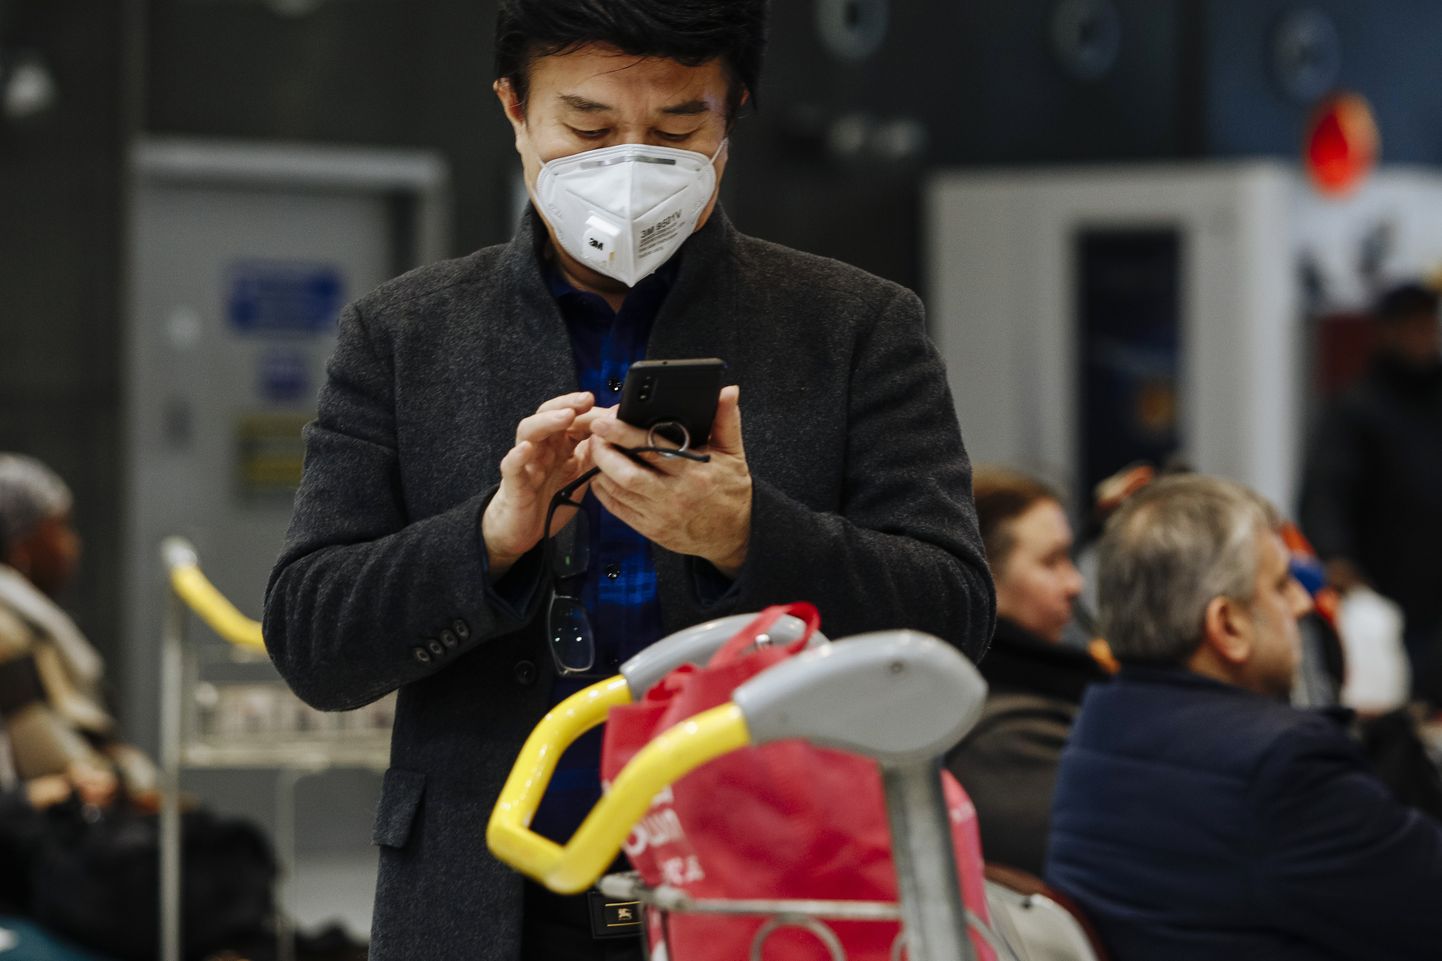 A traveler from Beijing, wearing a mask, uses his cellphone as he arrives at Charles de Gaulle airport, north of Paris, early Monday, Jan. 27, 2020. France's government announced Sunday it will repatriate up to hundreds of French citizens from the Chinese city of Wuhan, the epicenter of a deadly new virus. (AP Photo/Kamil Zihnioglu)